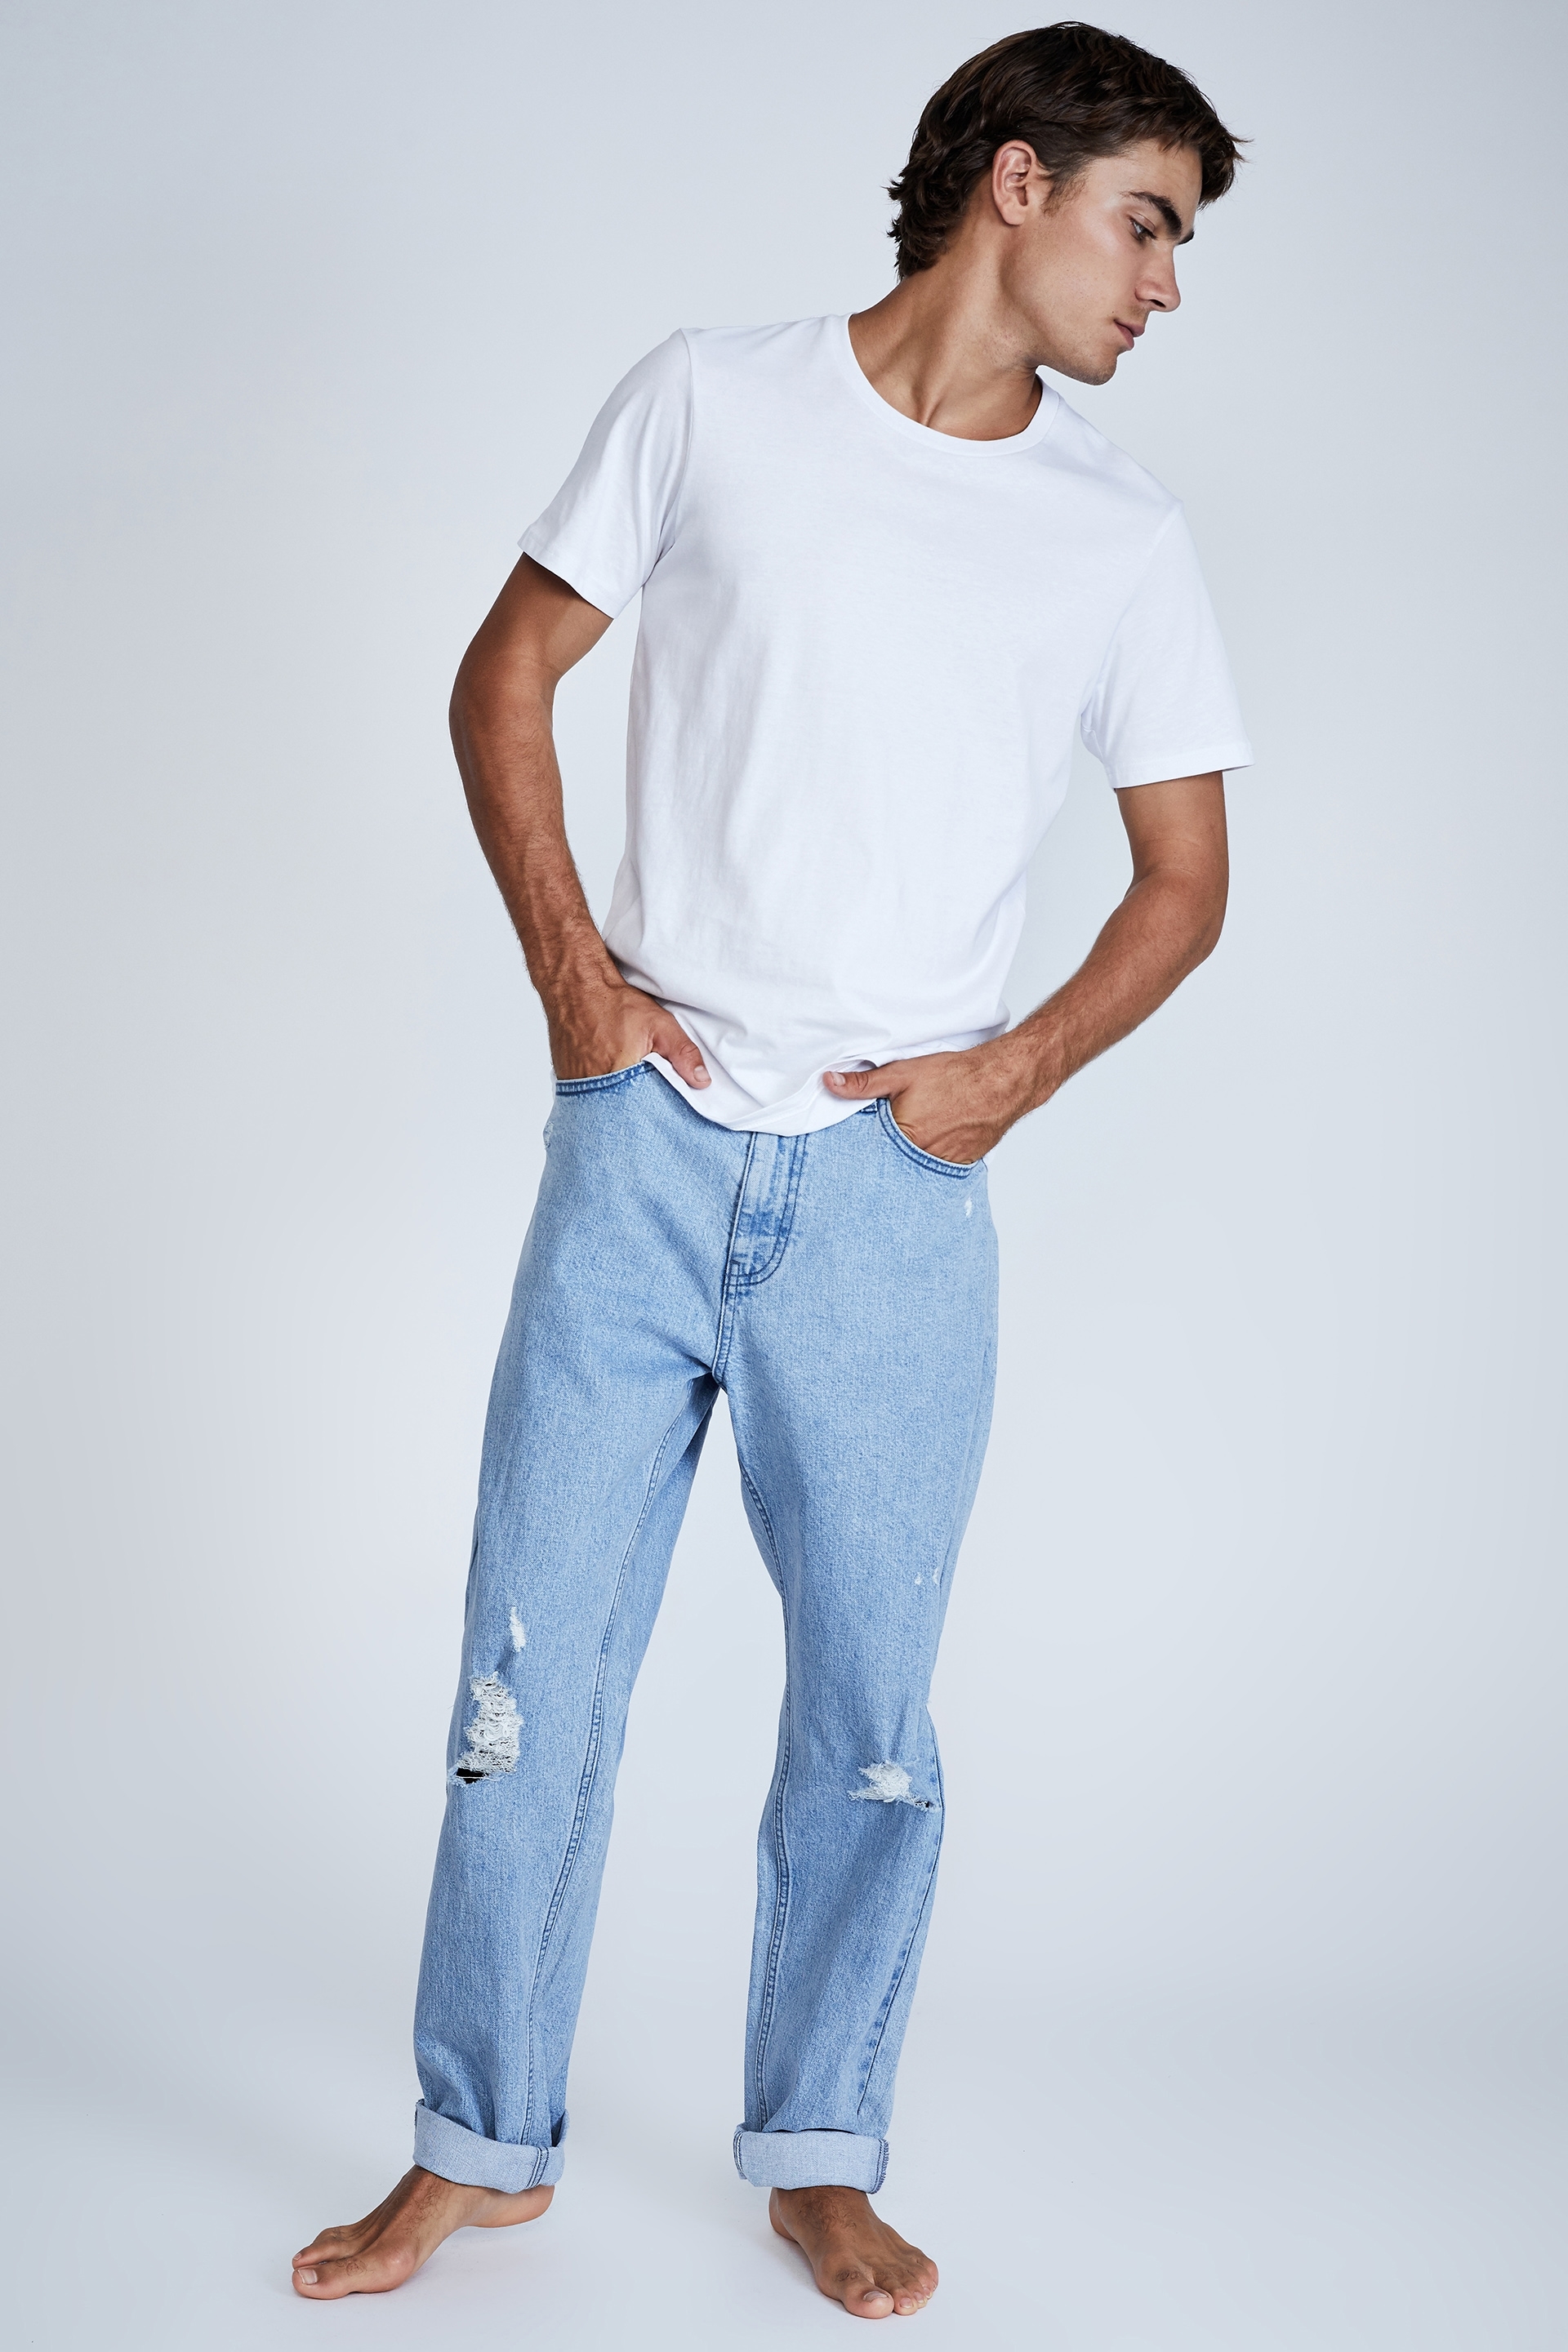 Cotton On Men - Relaxed Tapered Jean - Lennox blue